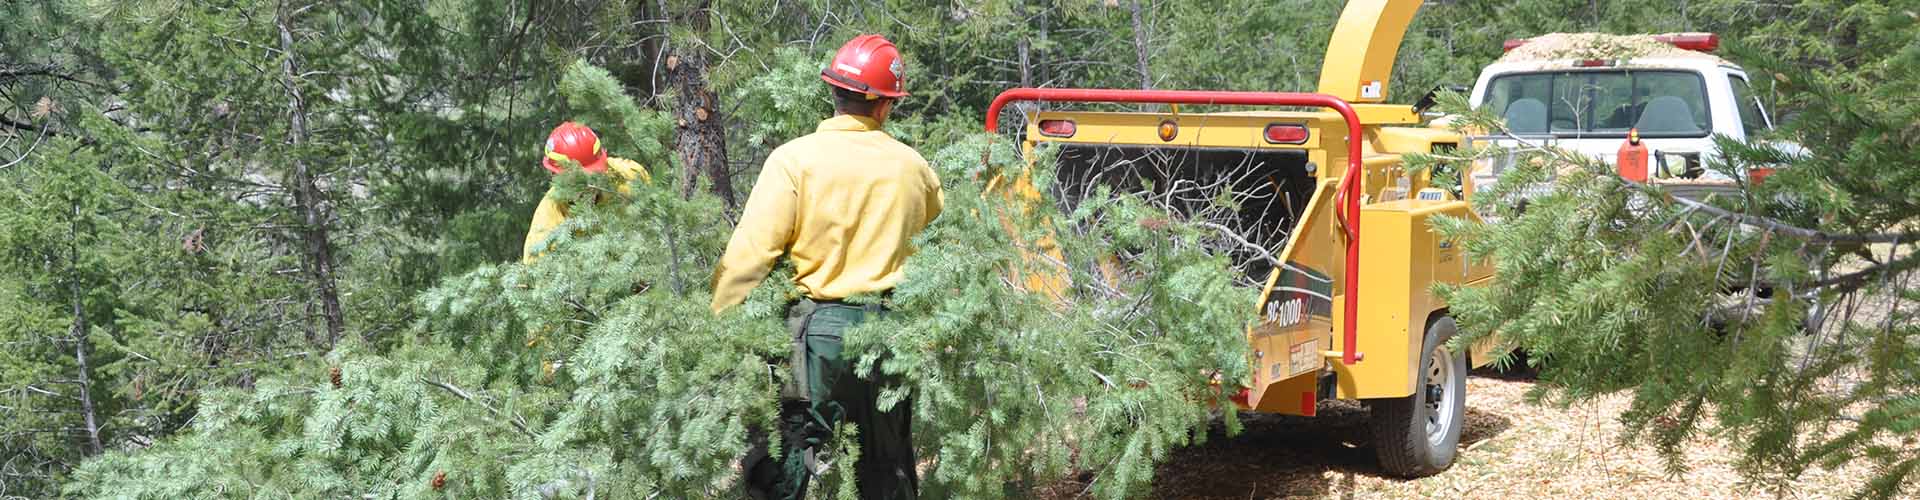 Two foresters placing cut trees into a mobile grinder